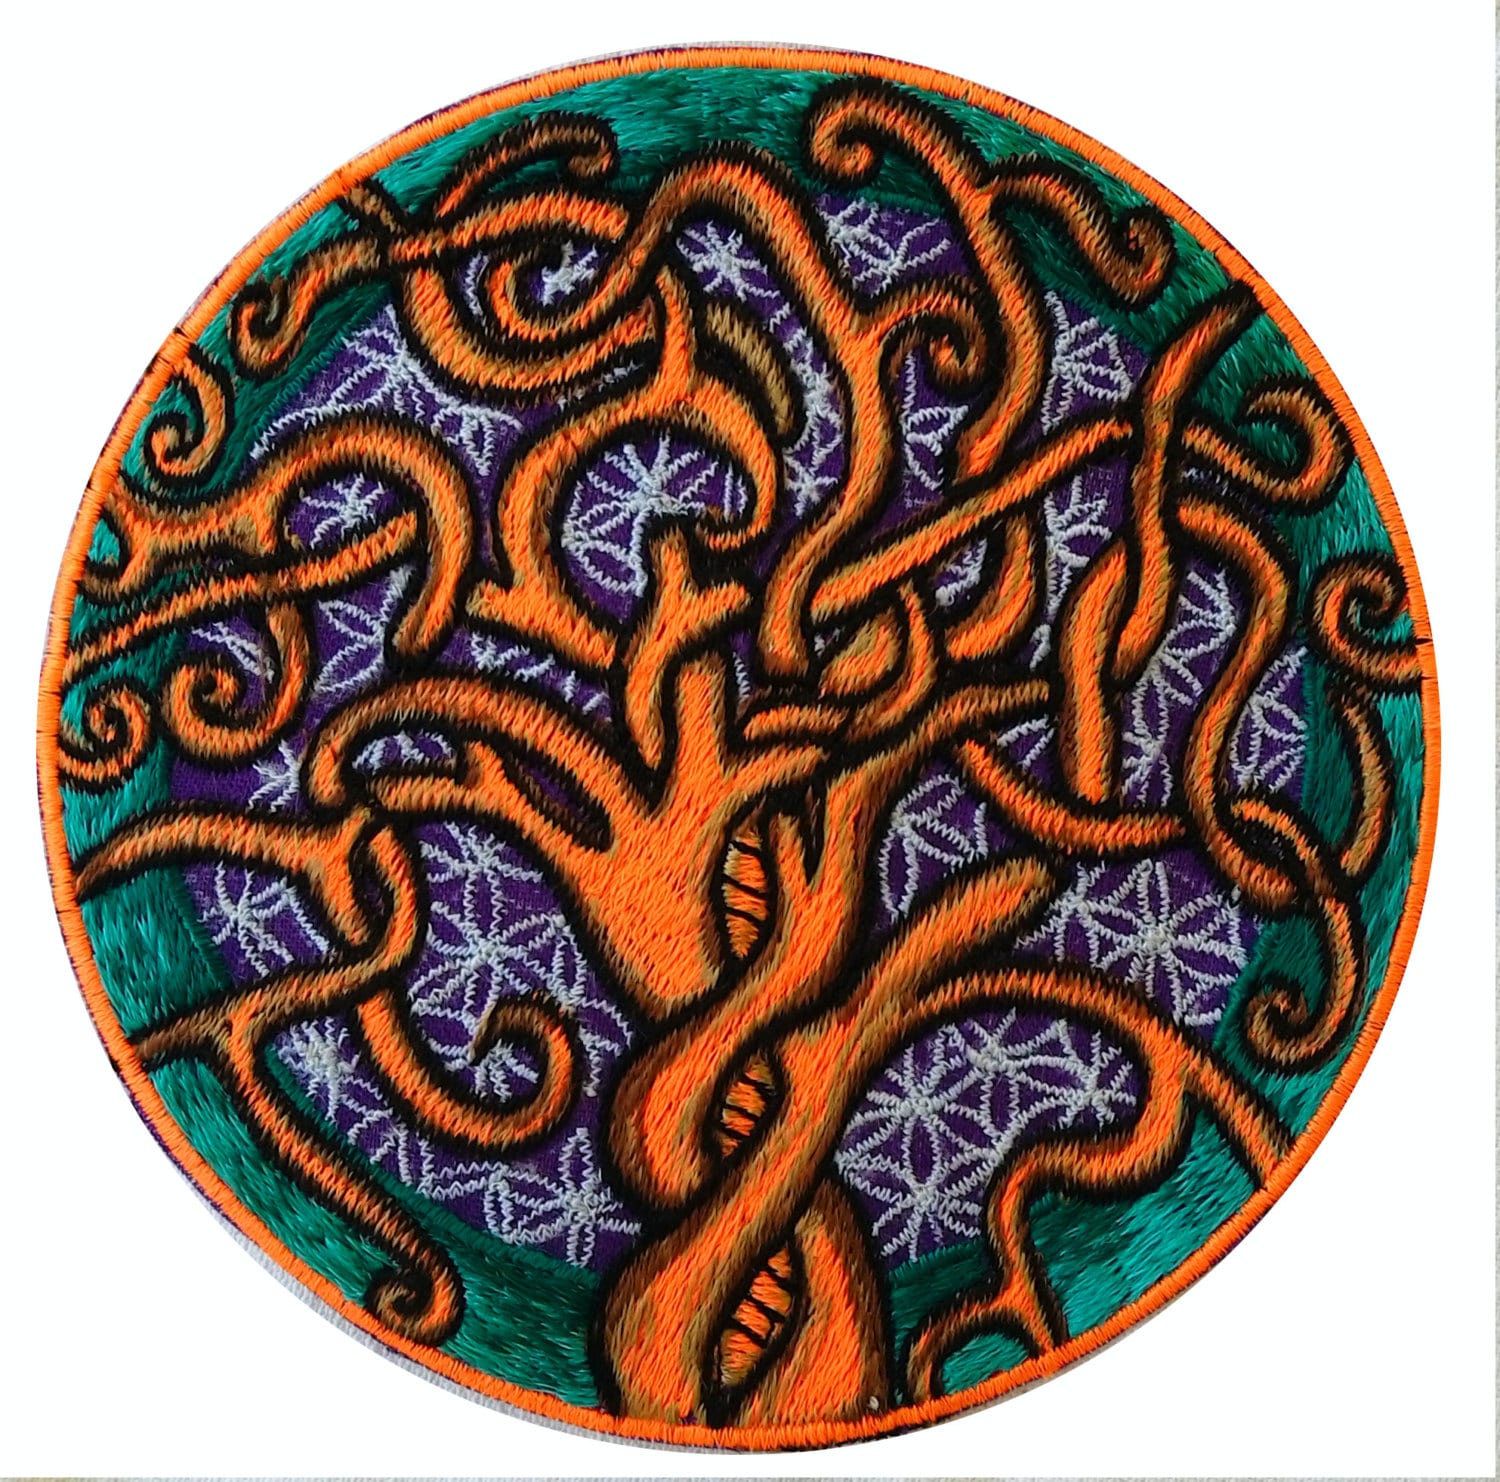 Tree of Life Flower of Life handmade embroidery sacred geometry embroidery mandala patch blacklight glowing art